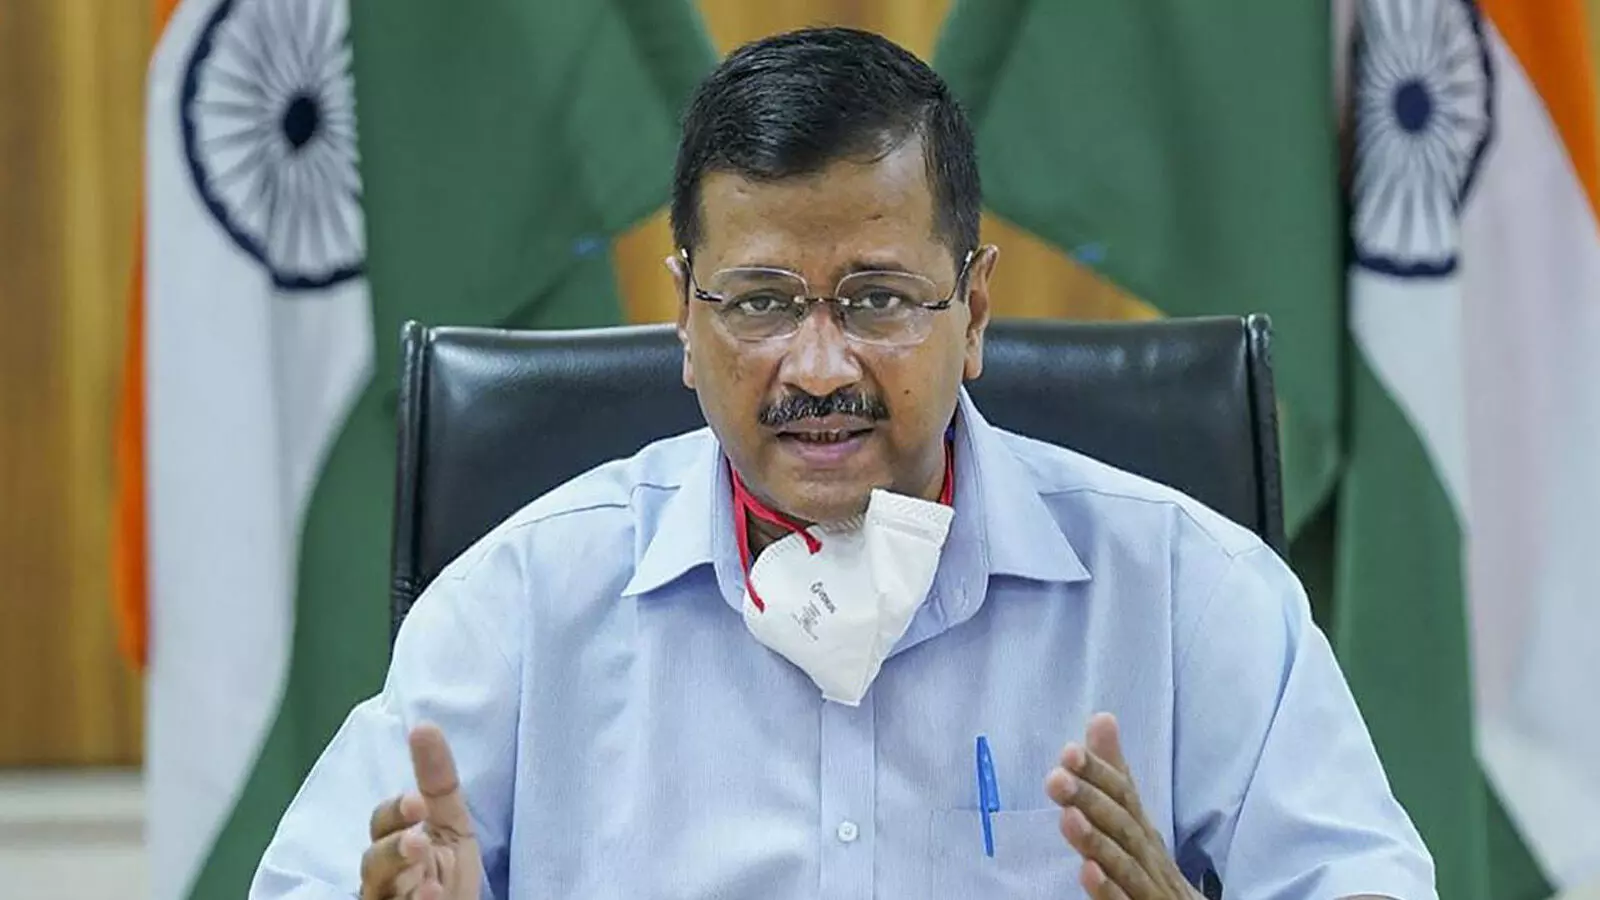 Cant Take Risk: Delhi Schools NOT to reopen soon, says CM Kejriwal